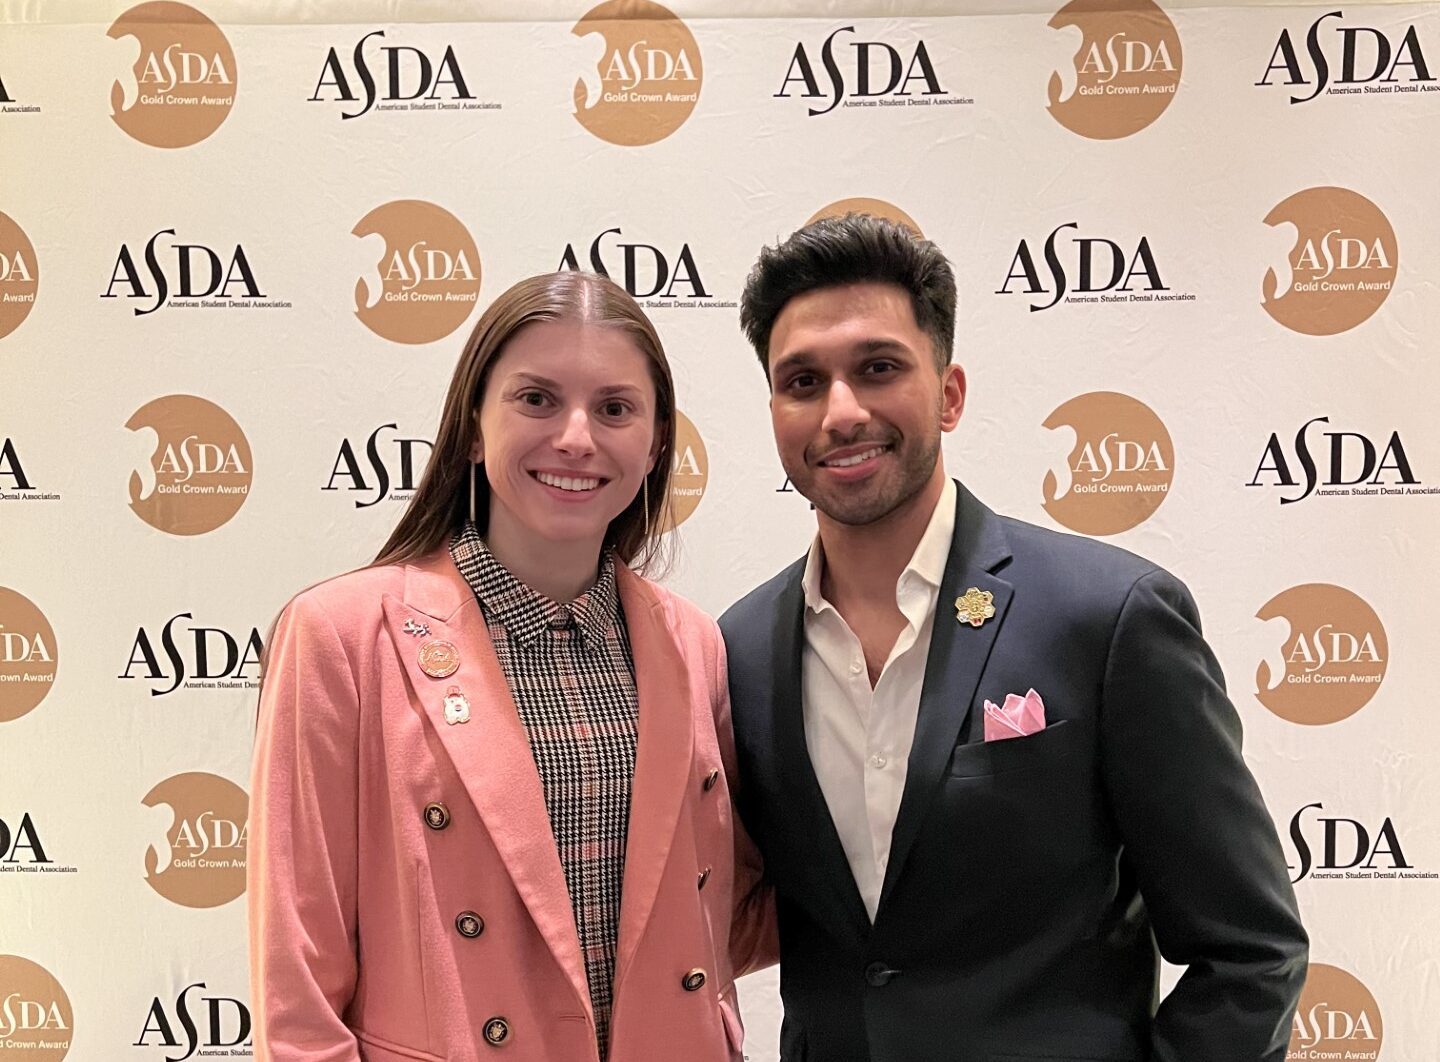 Penn students elected to American Student Dental Association leadership roles